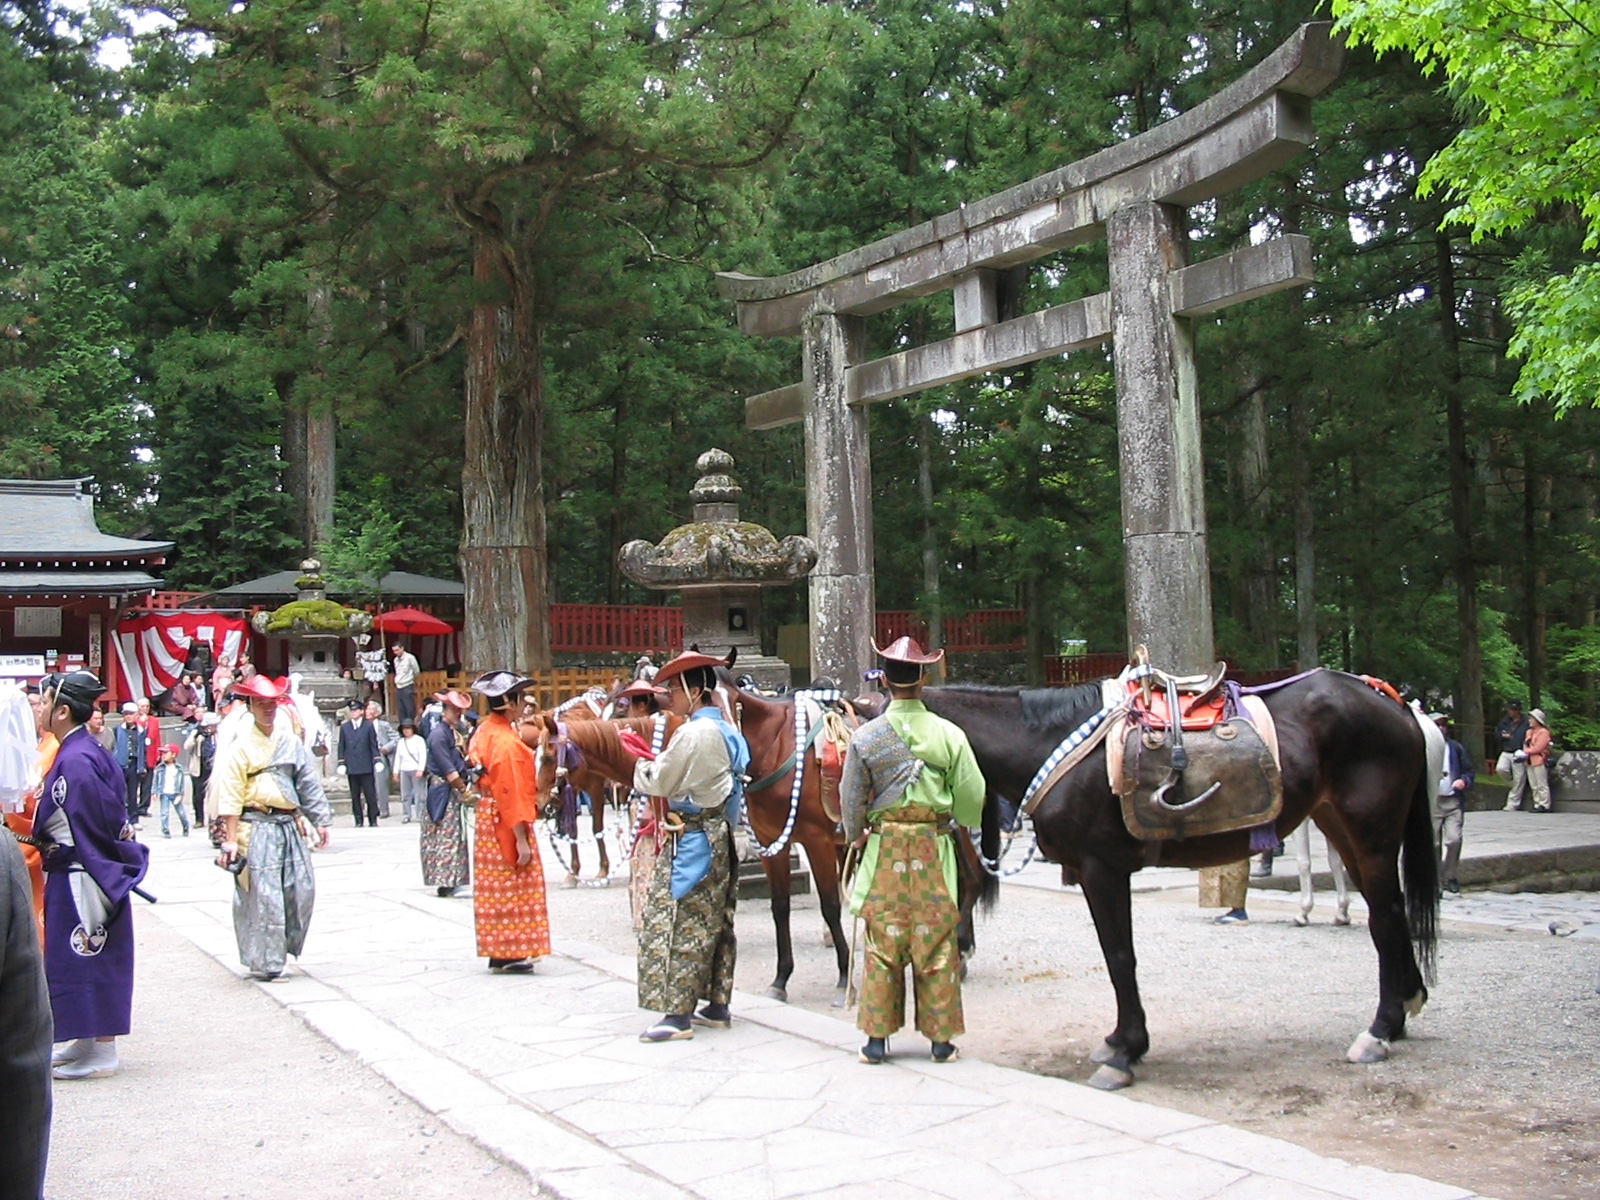 men in traditional clothing standing with a horse in front of a torri gate